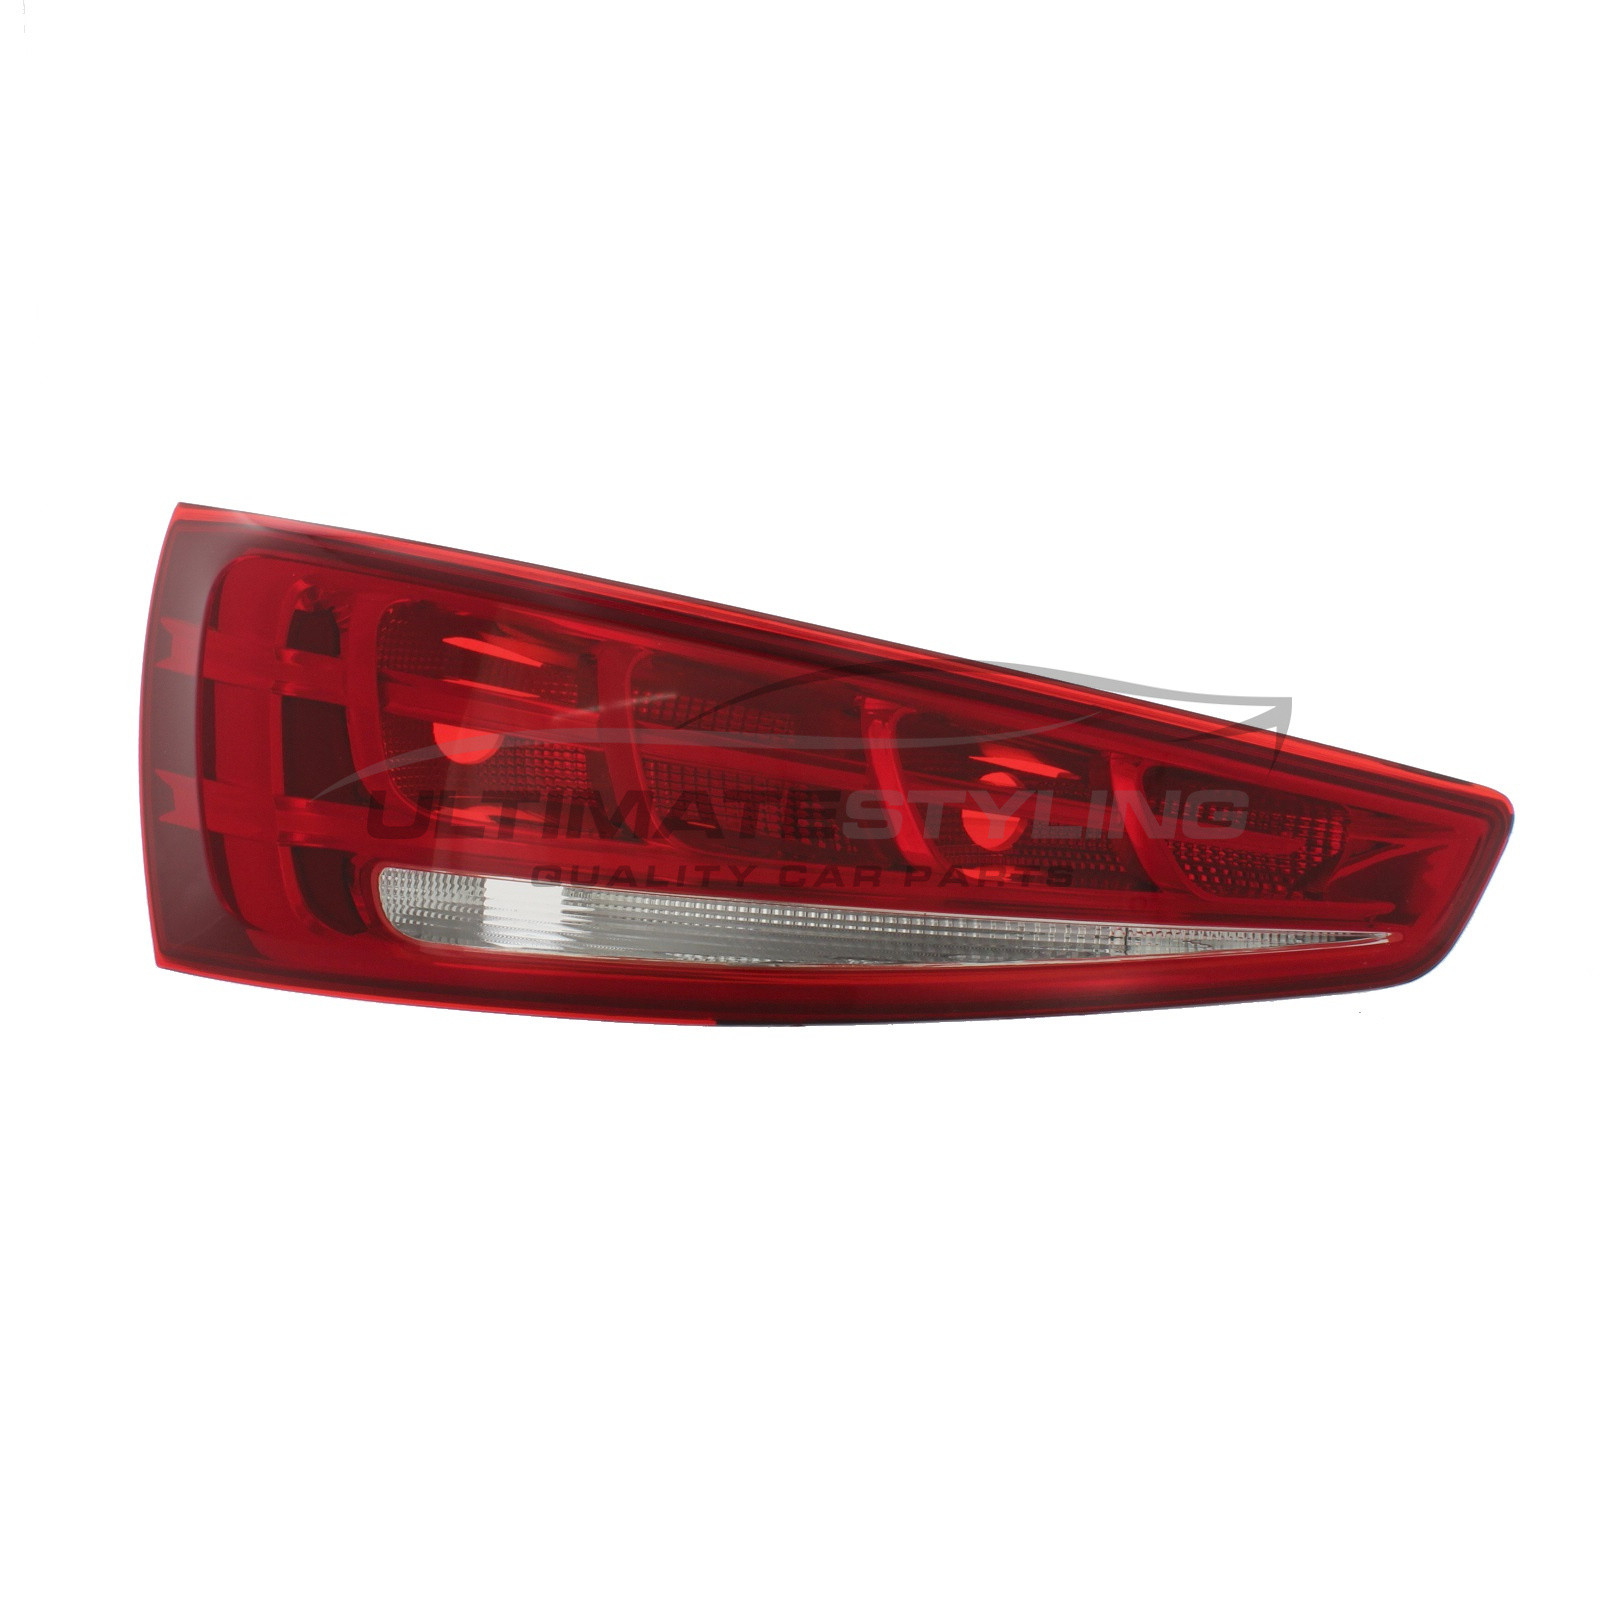 Audi Q3 2011-2015 Non-LED with Clear Indicator Rear Light / Tail Light Excluding Bulb Holder Passenger Side (LH)